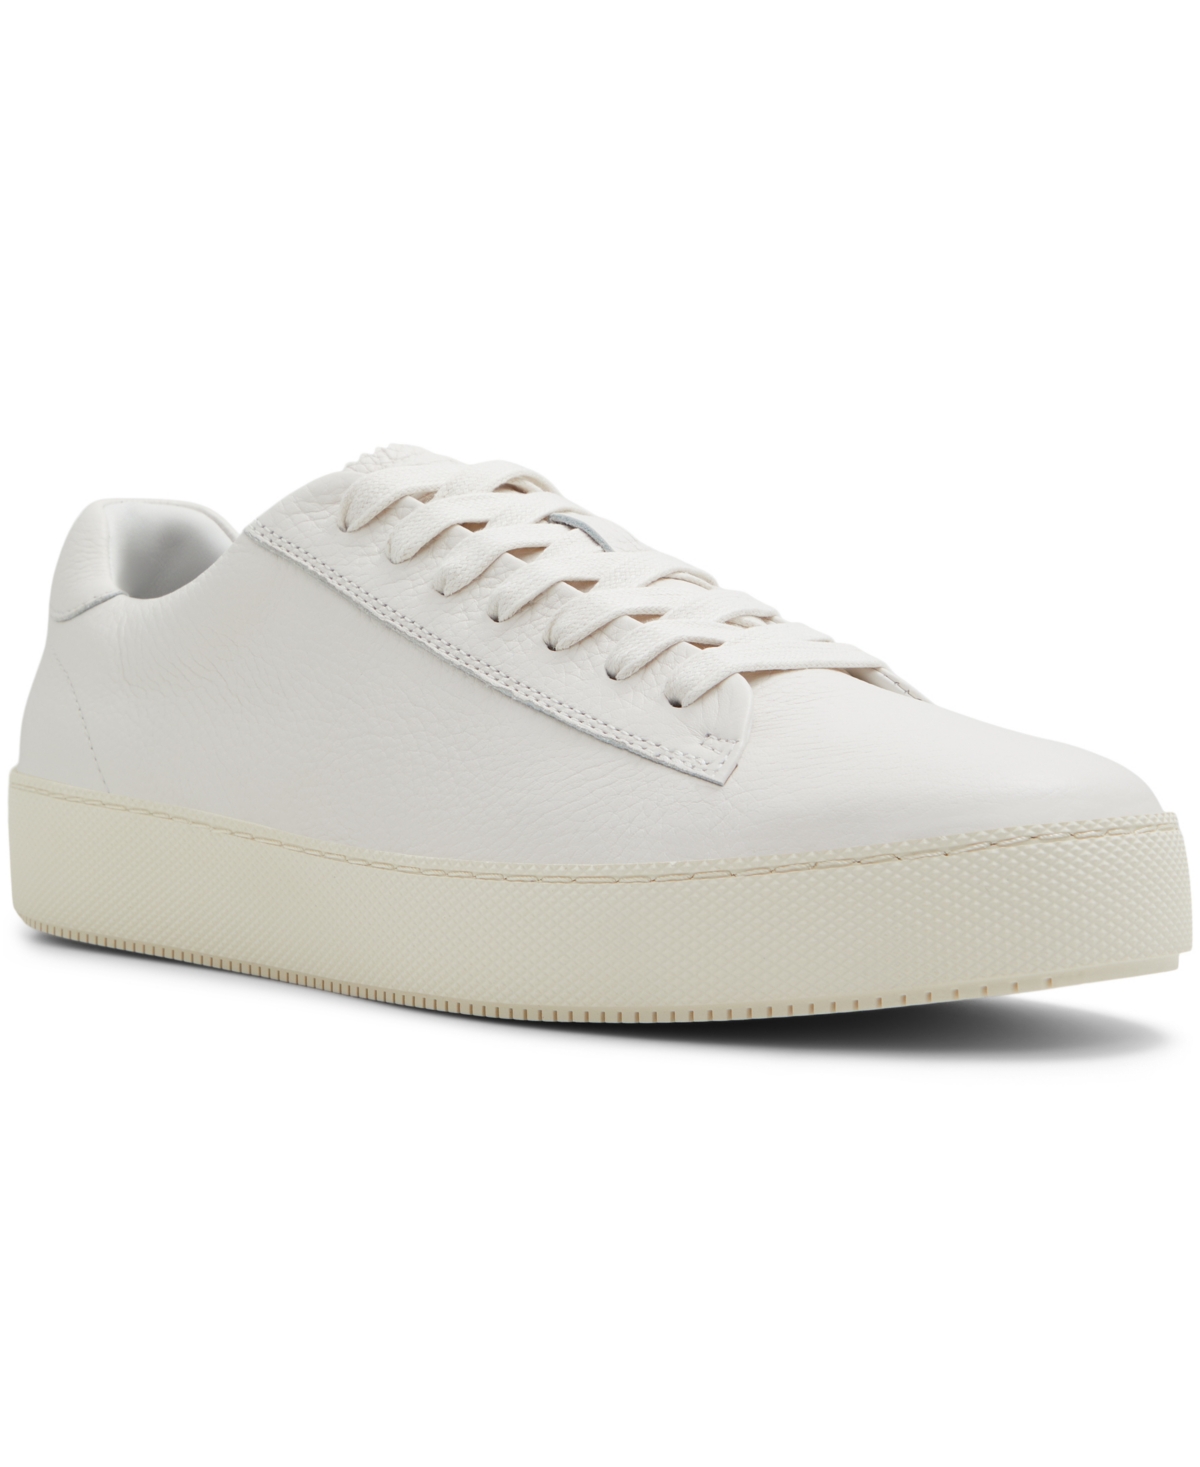 Men's Westwood Lace Up Sneakers - White